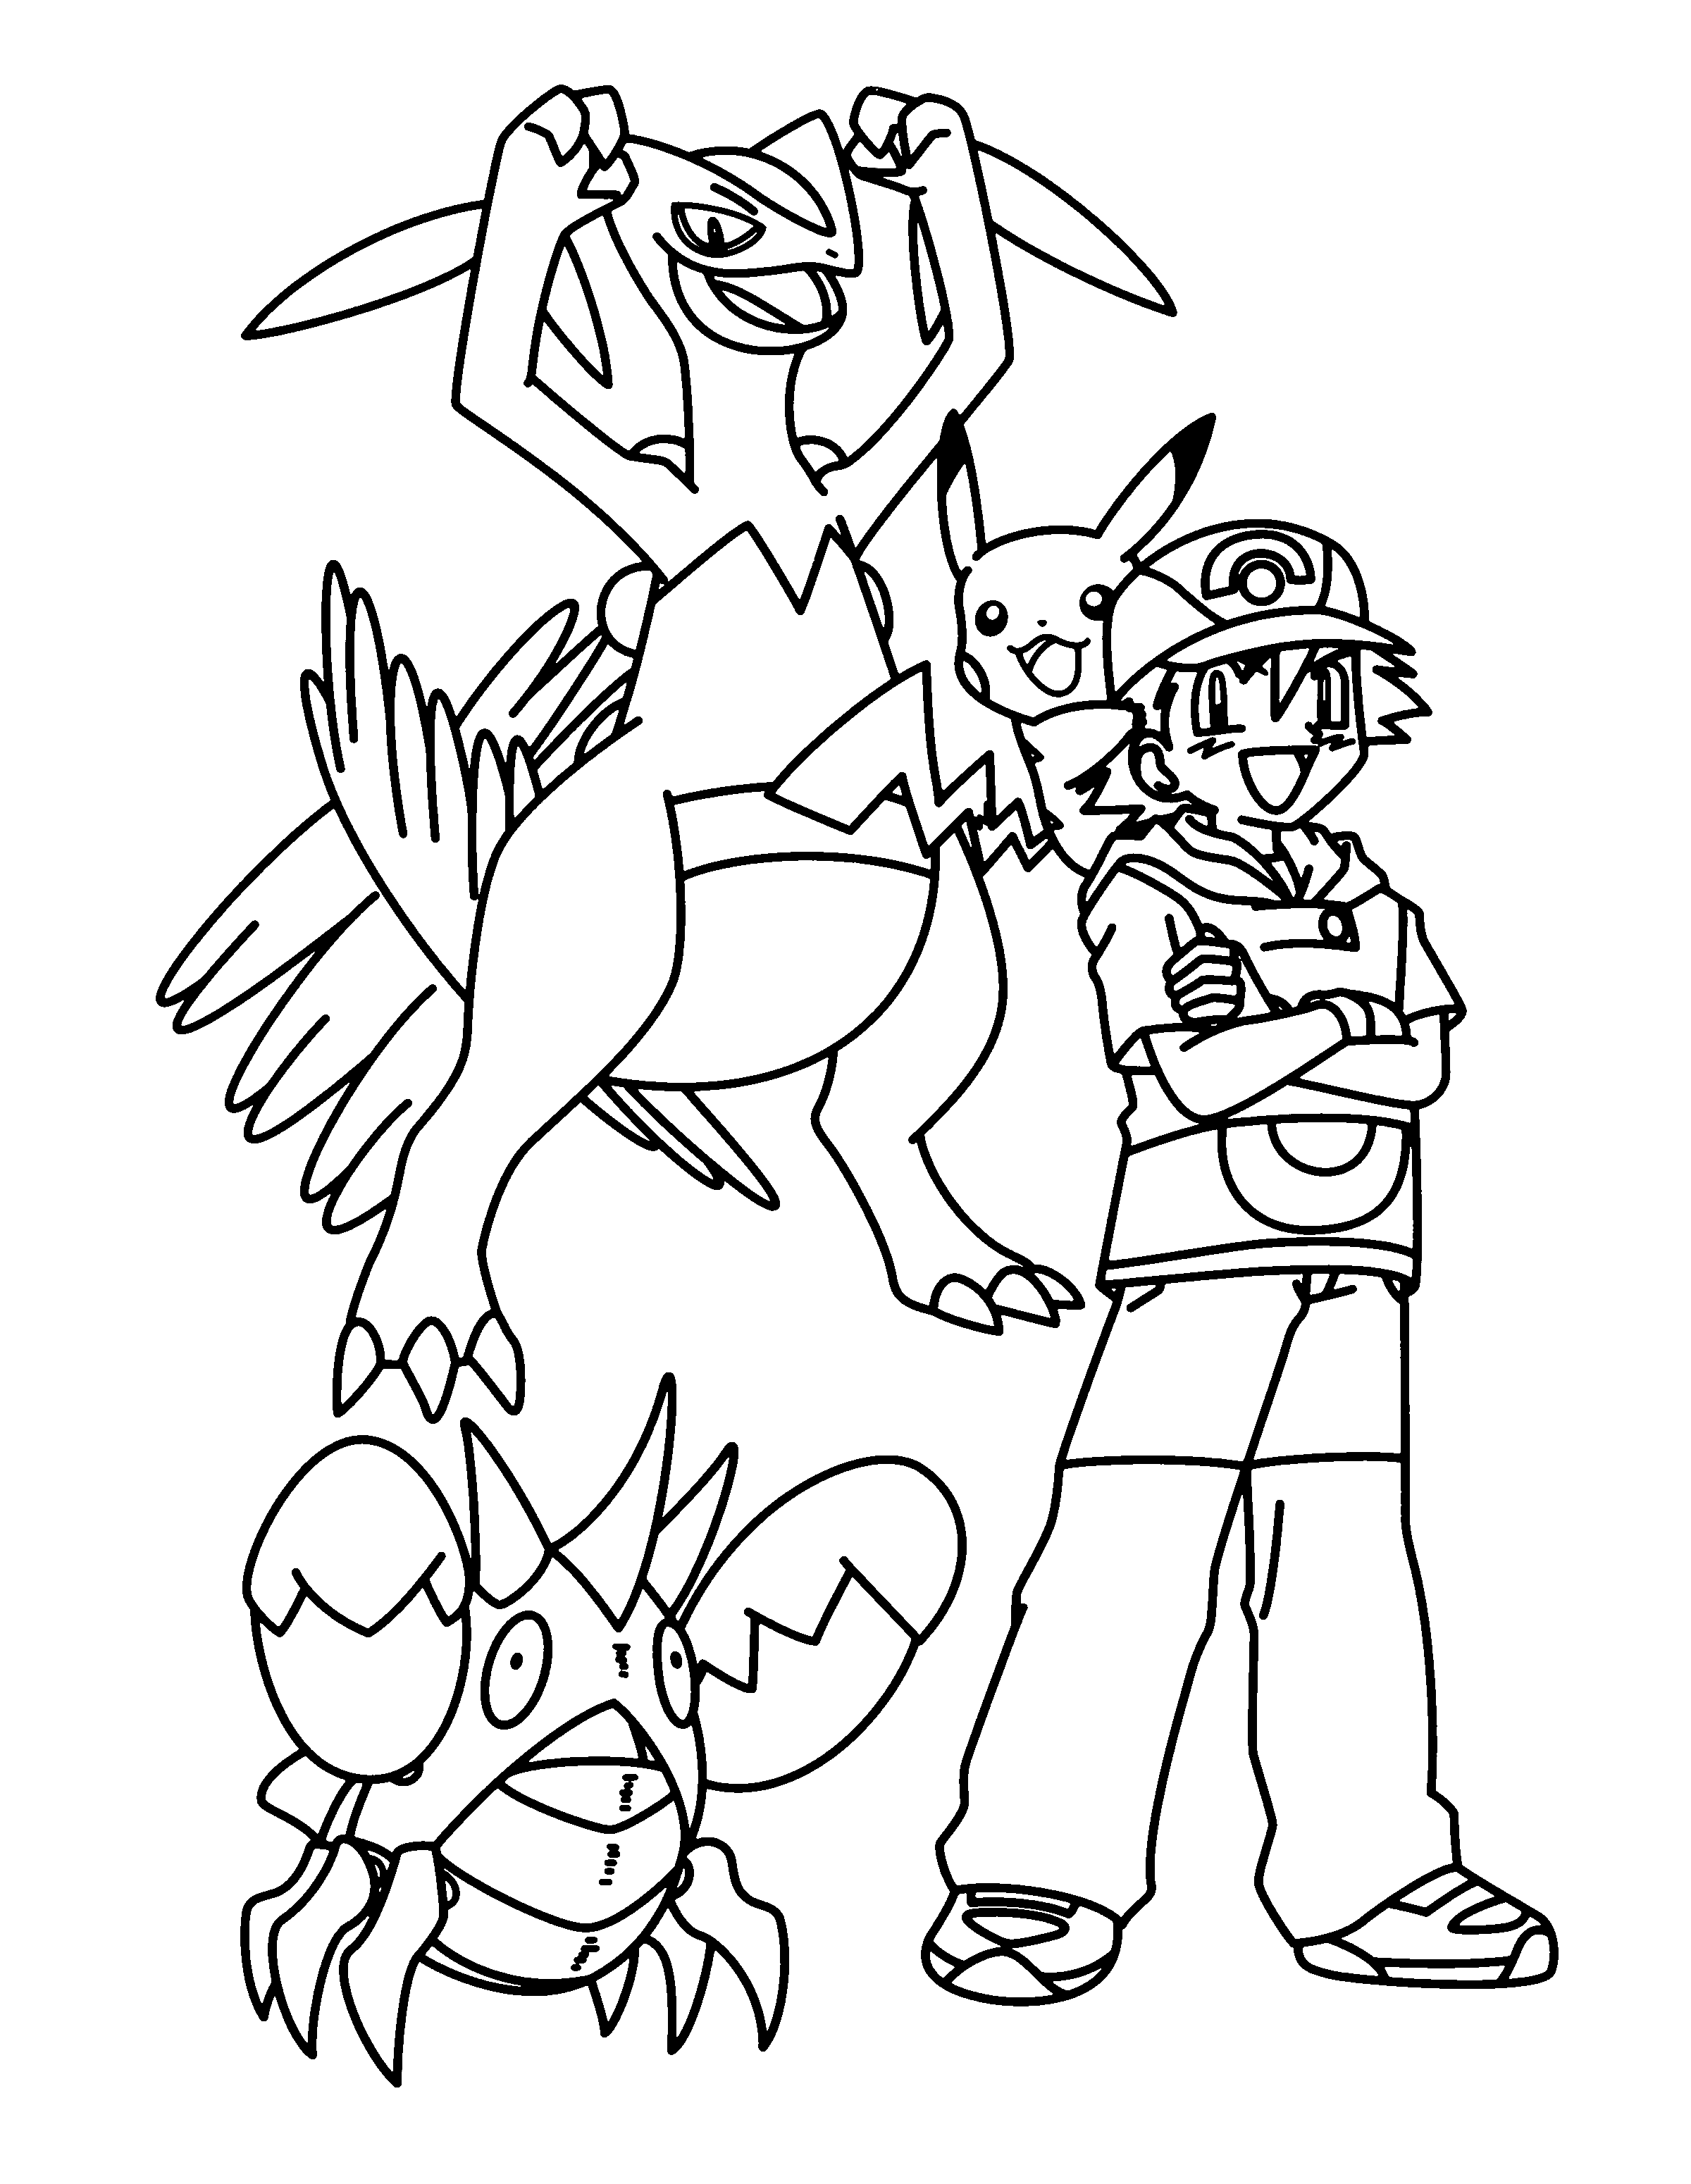 Coloring Page - Pokemon advanced coloring pages 54